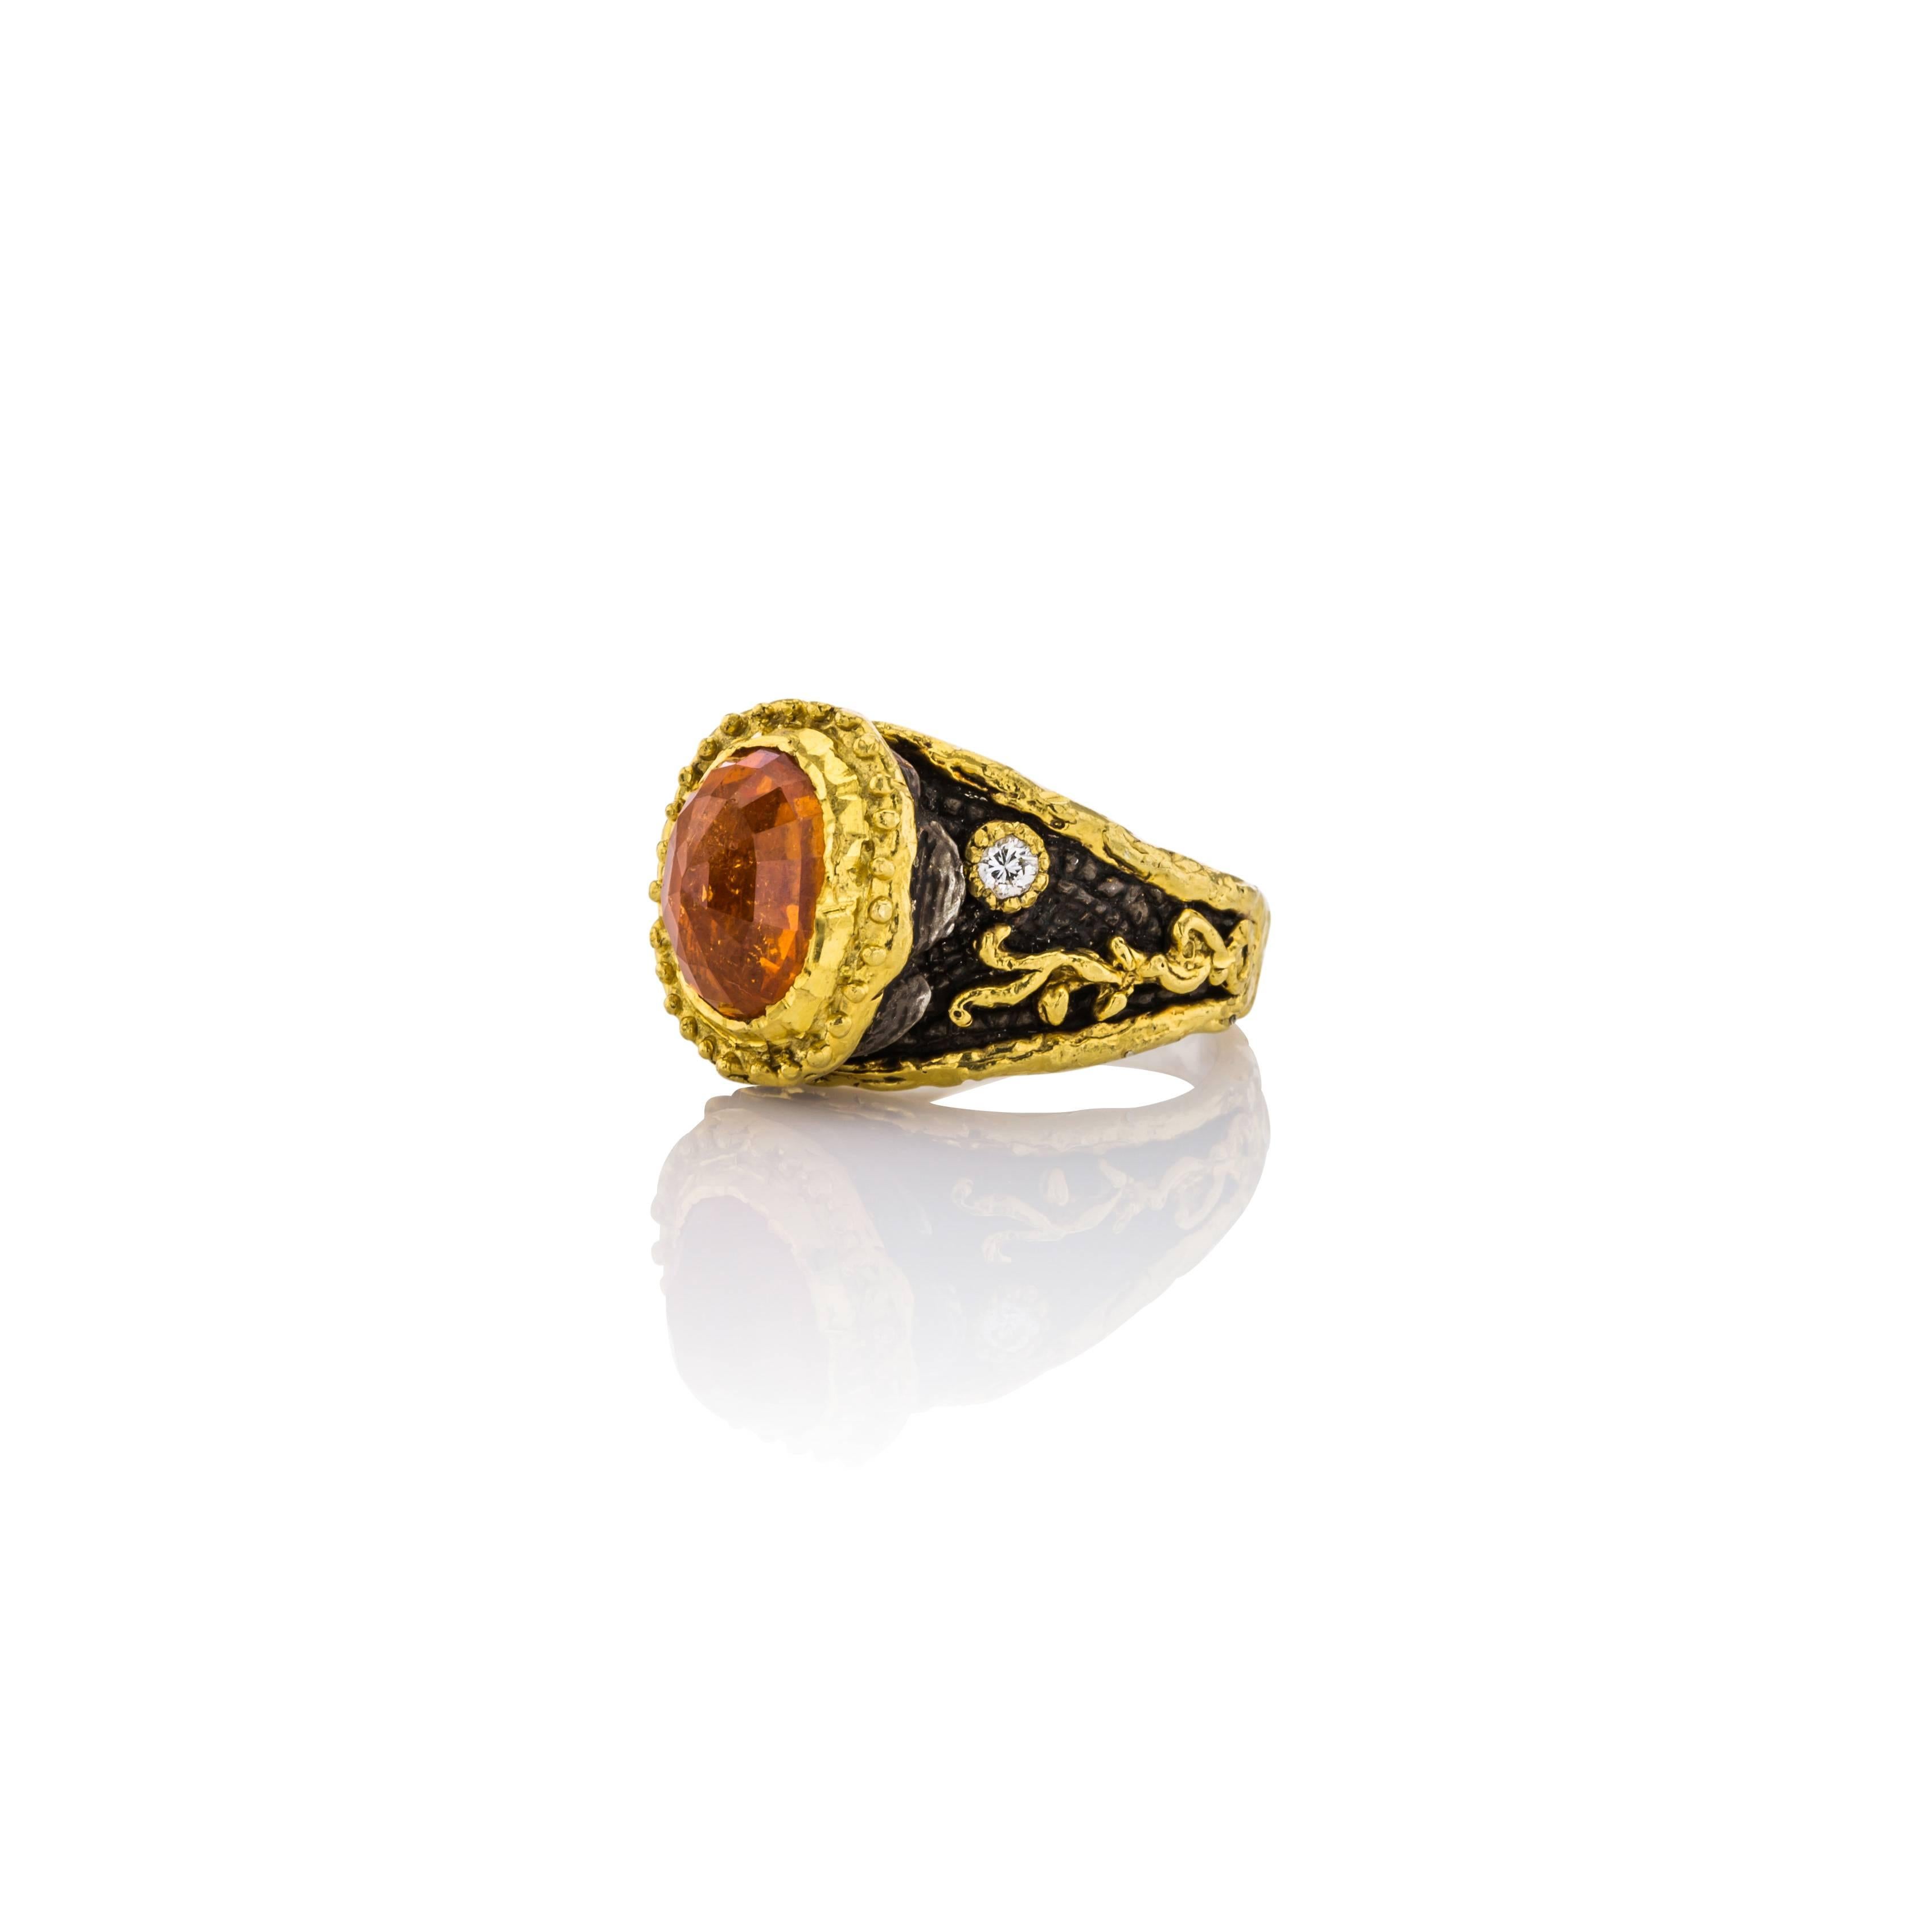 Beautiful ring designed and made by Victor Velyan.  This ring can be custom fitted to your finger size.  This Sterling Silver Ring with 24K Gold and diamond accents has a center stone of Spesertite Garnet and a brown patina background which is